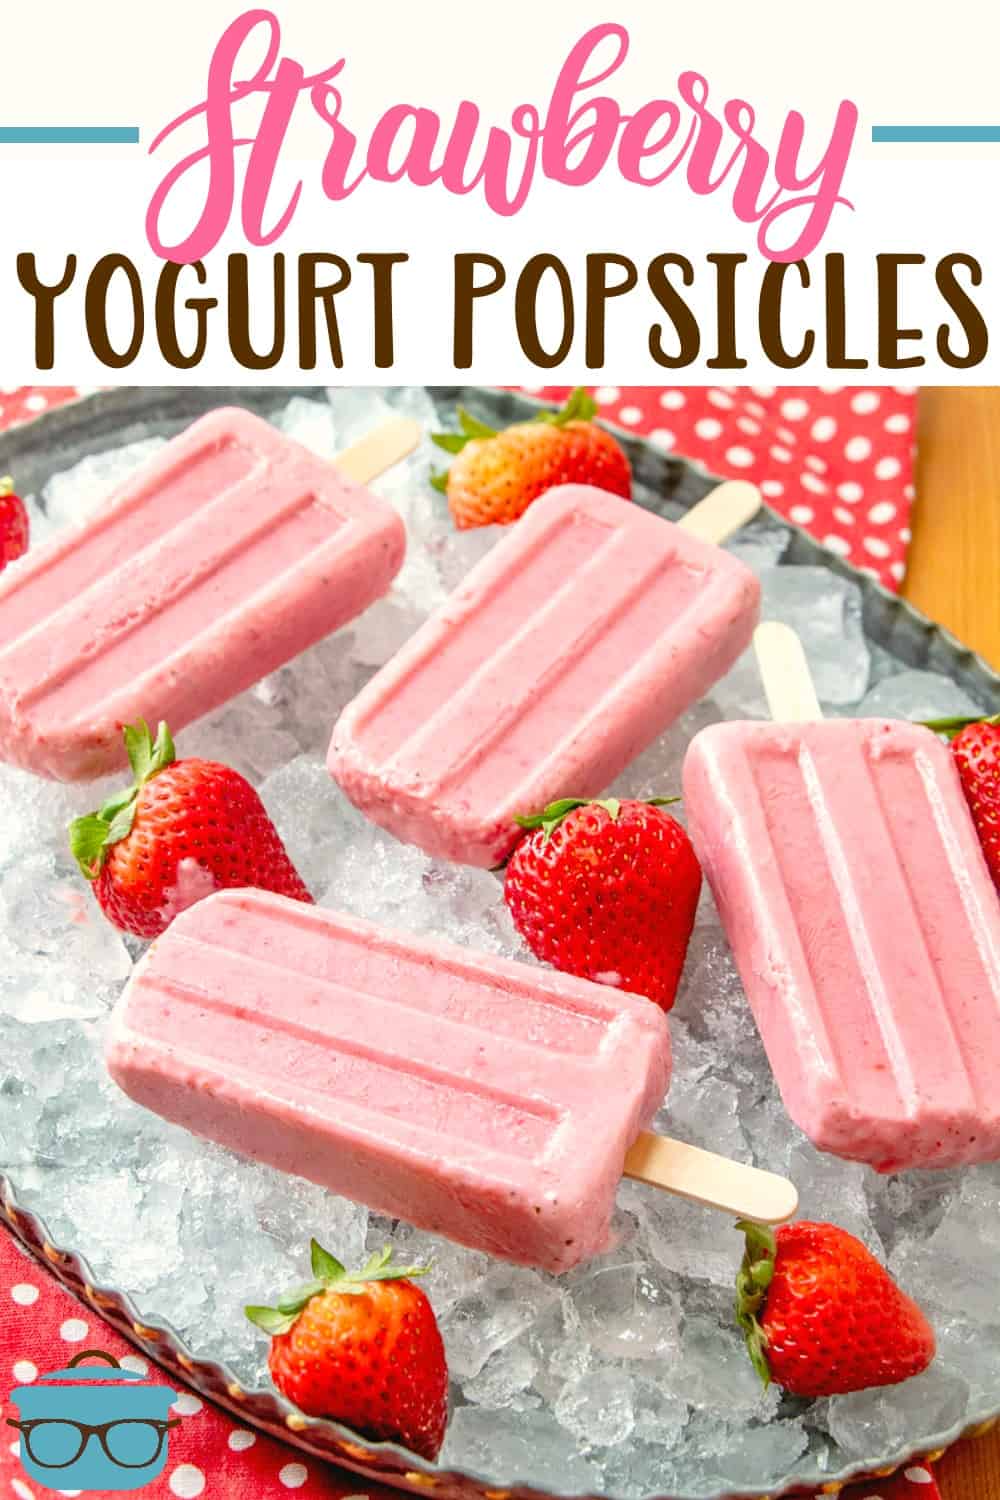 Strawberry Yogurt Popsicles recipe from The Country Cook, four strawberry popsicles shown on crushed ice with fresh strawberries placed around the popsicles for presentation.